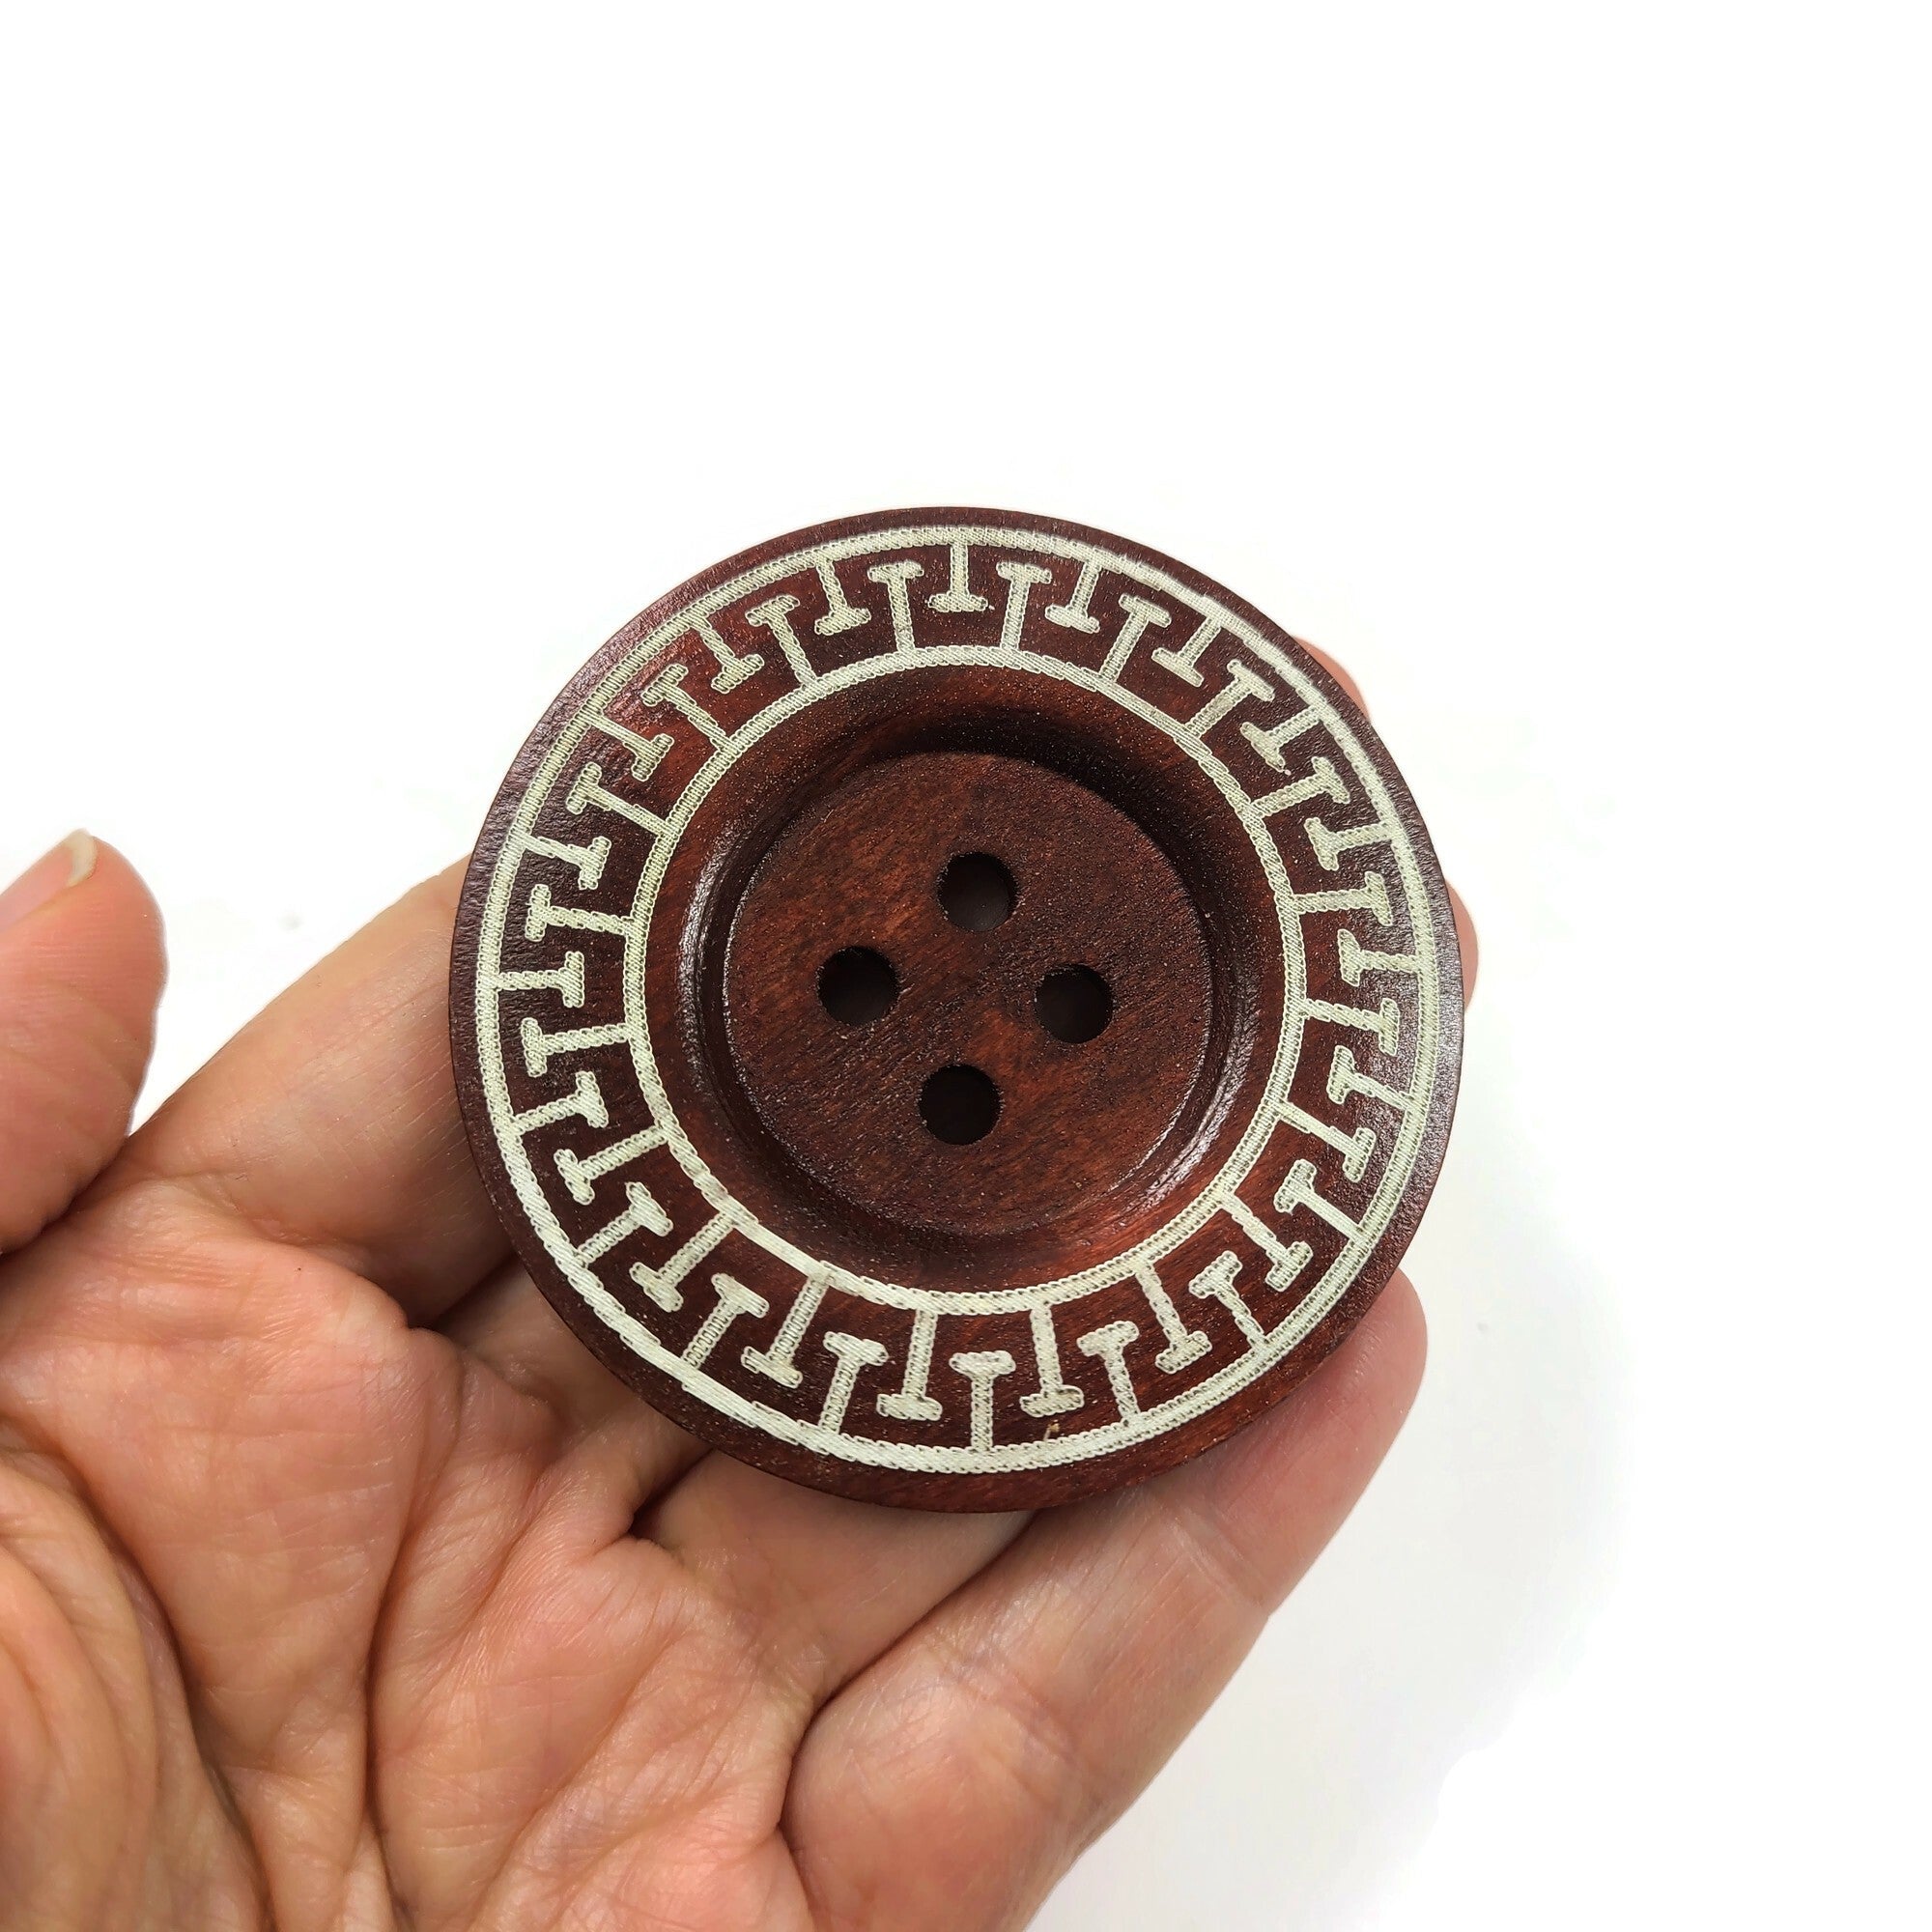 6 wooden Toggle Buttons - 4 x 1.2 cm